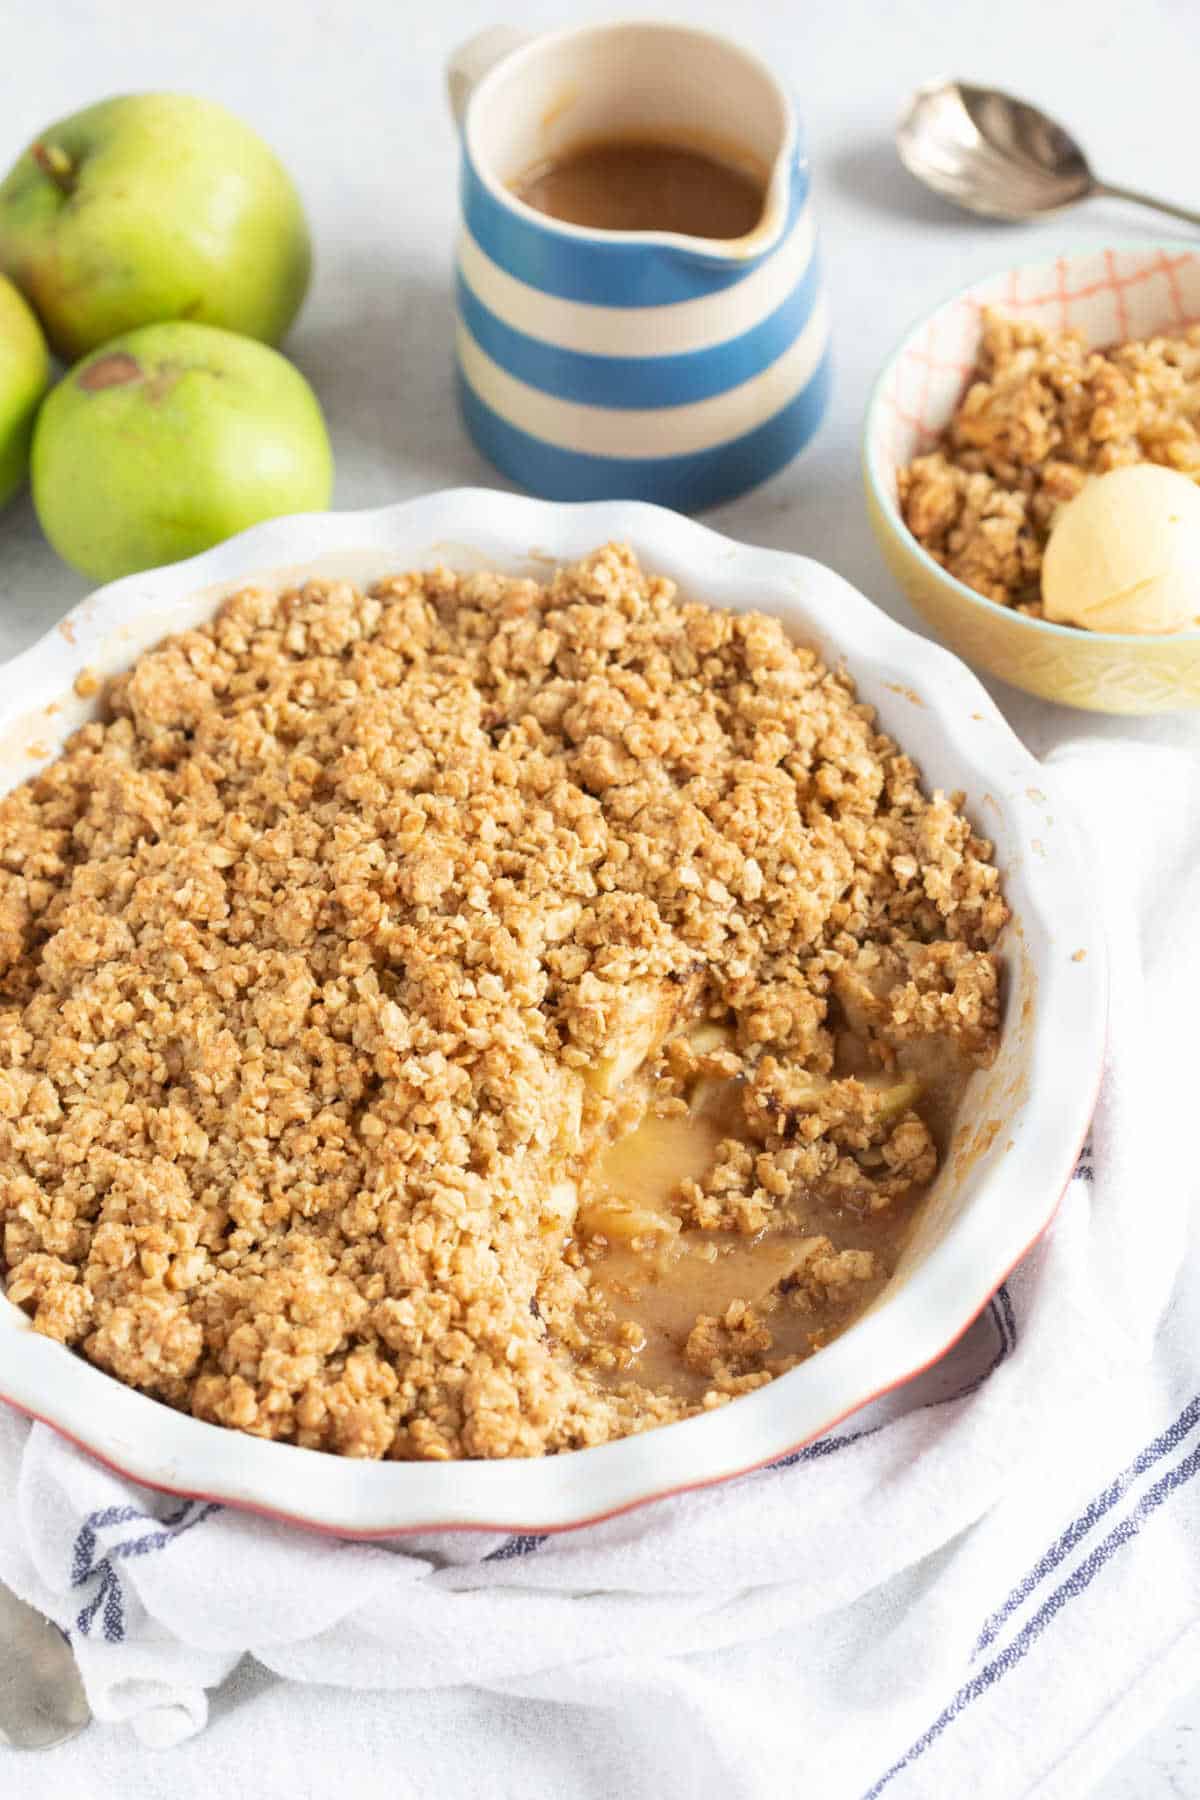 Toffee apple crumble in a red pie dish with a jug of toffee sauce on the side.